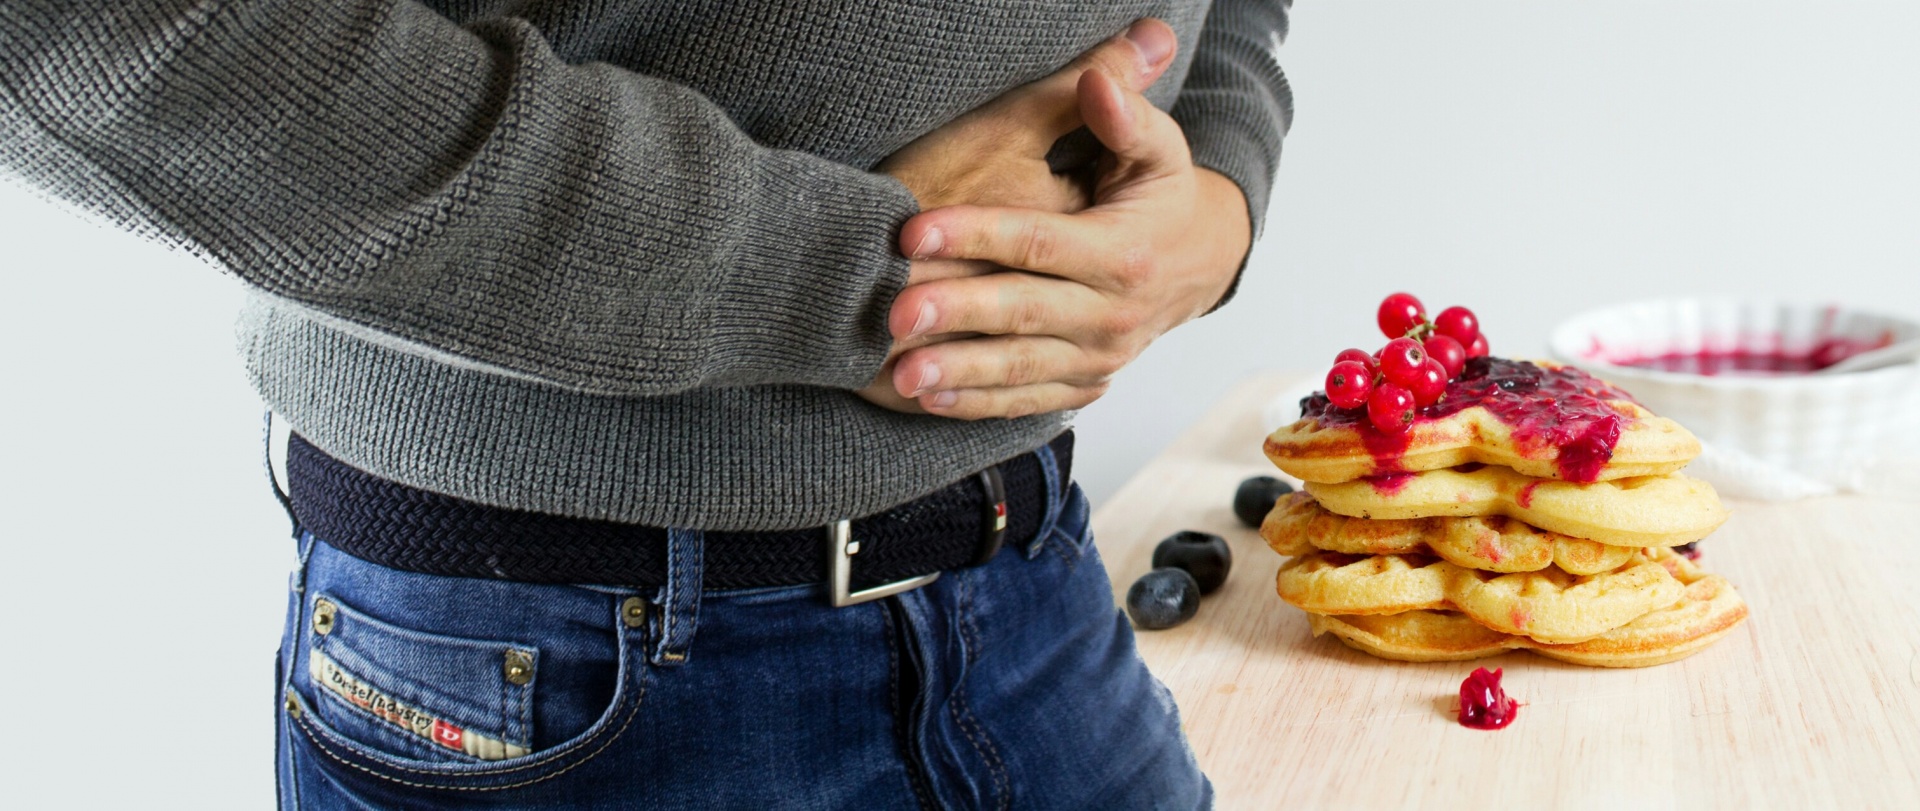 Photograph of a person clasping his hands over his stomach, indicating that he is in pain. A stack of pancakes topped with fruit is on a wood tabletop in the background.